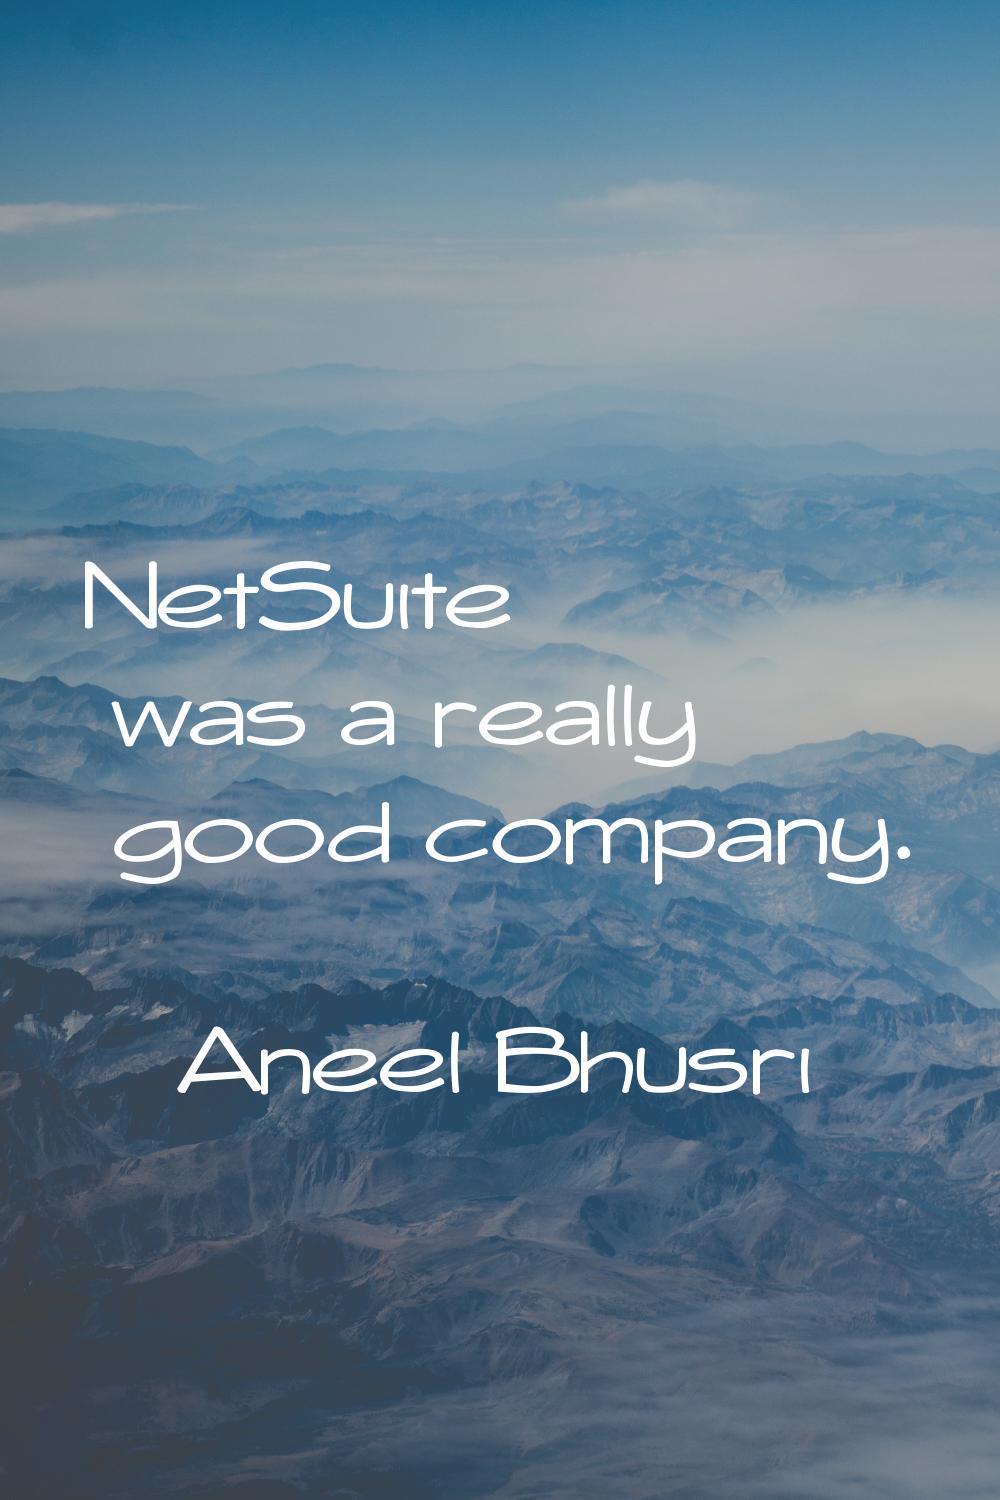 NetSuite was a really good company.